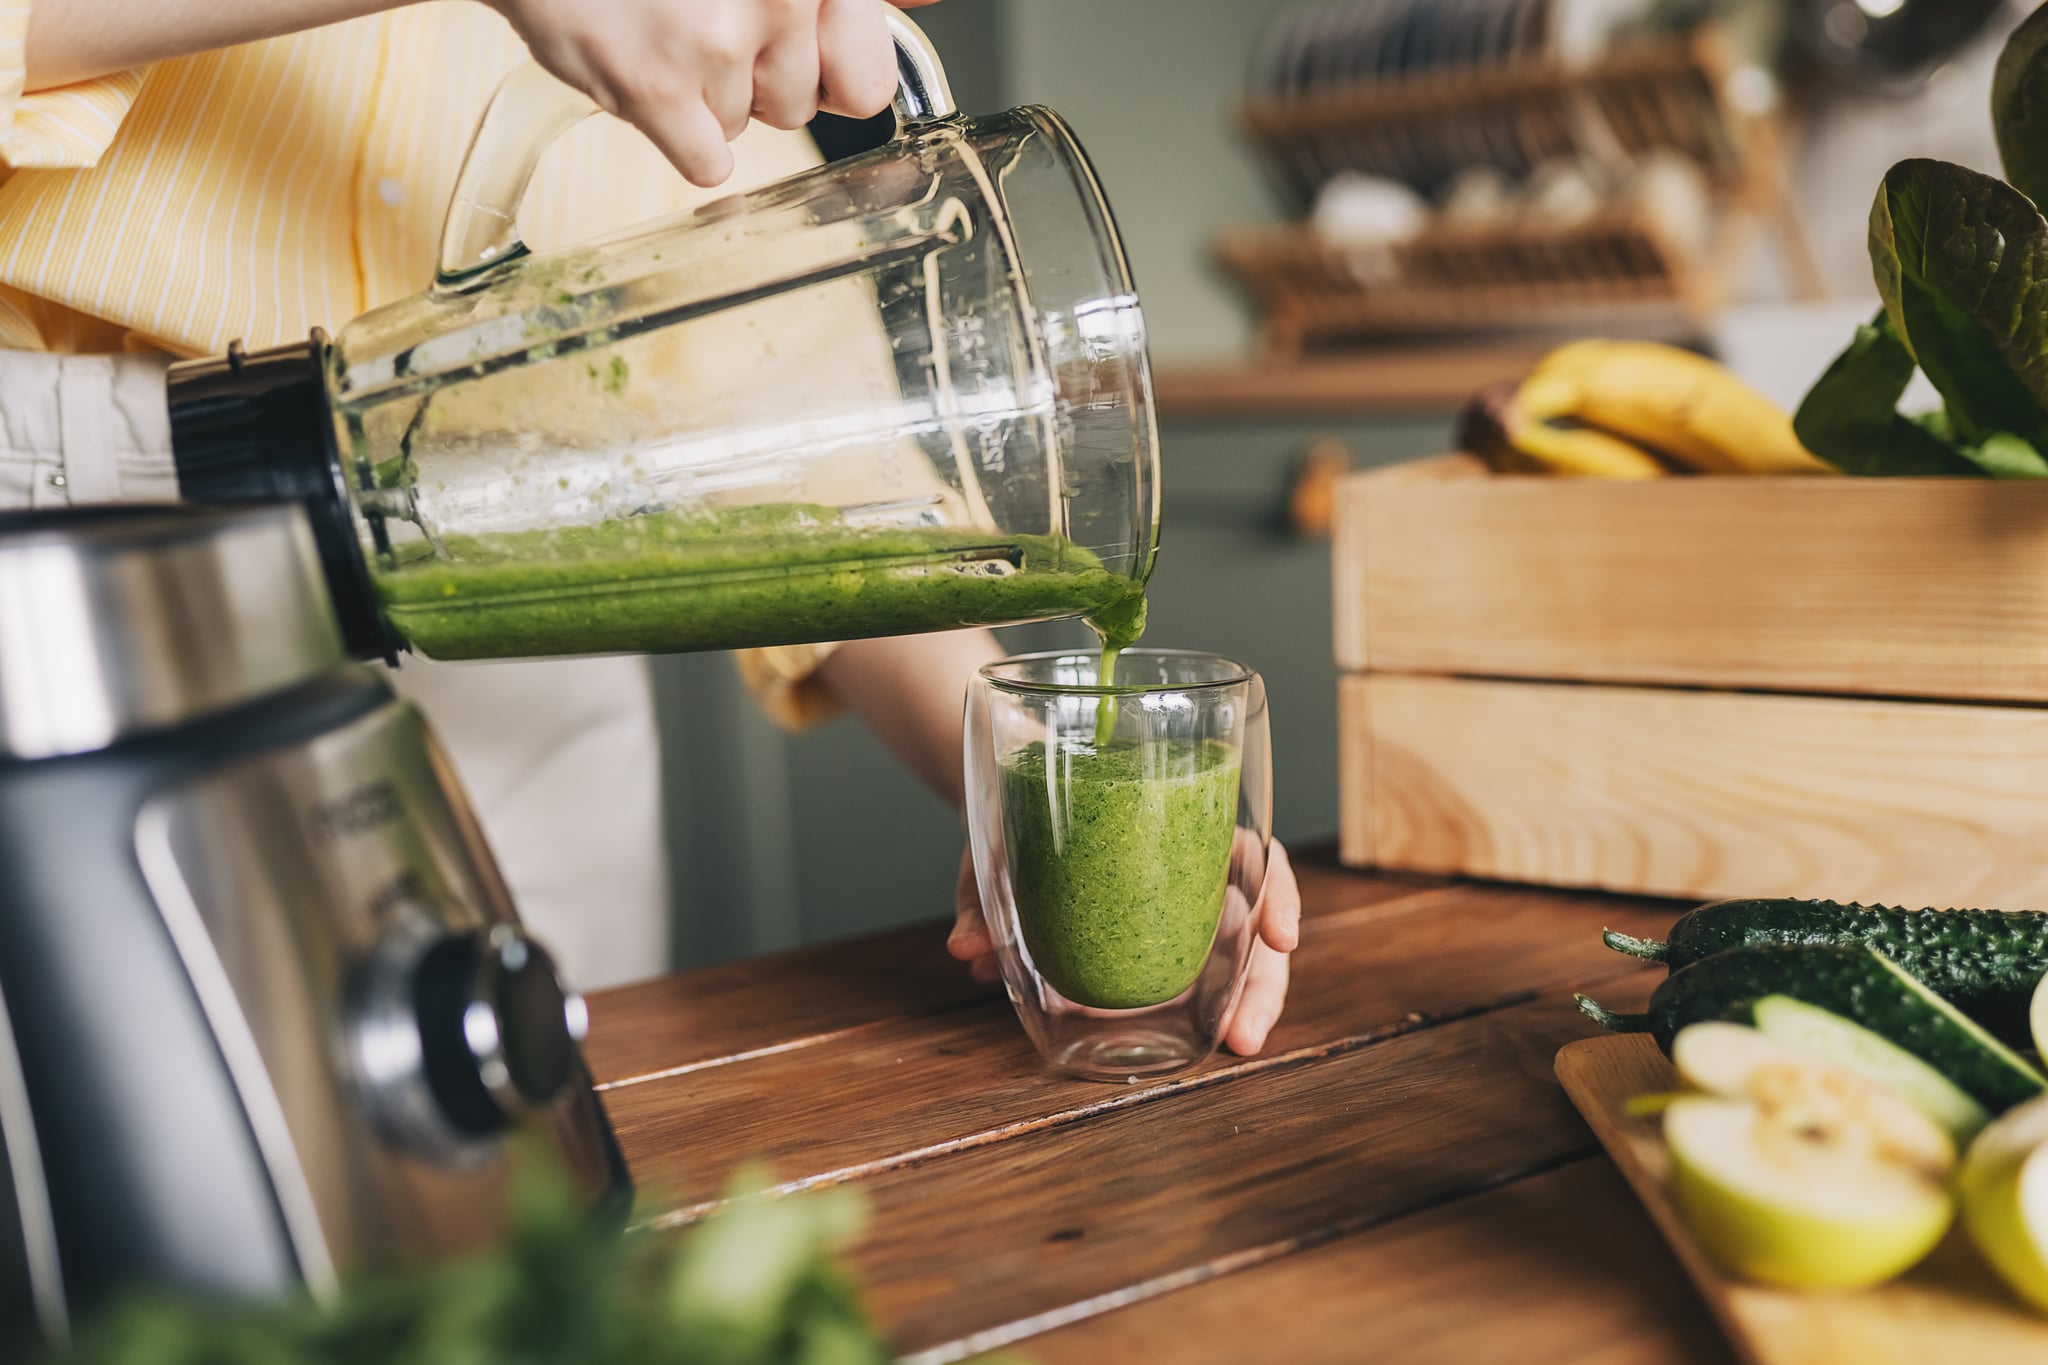  are smoothies healthy?